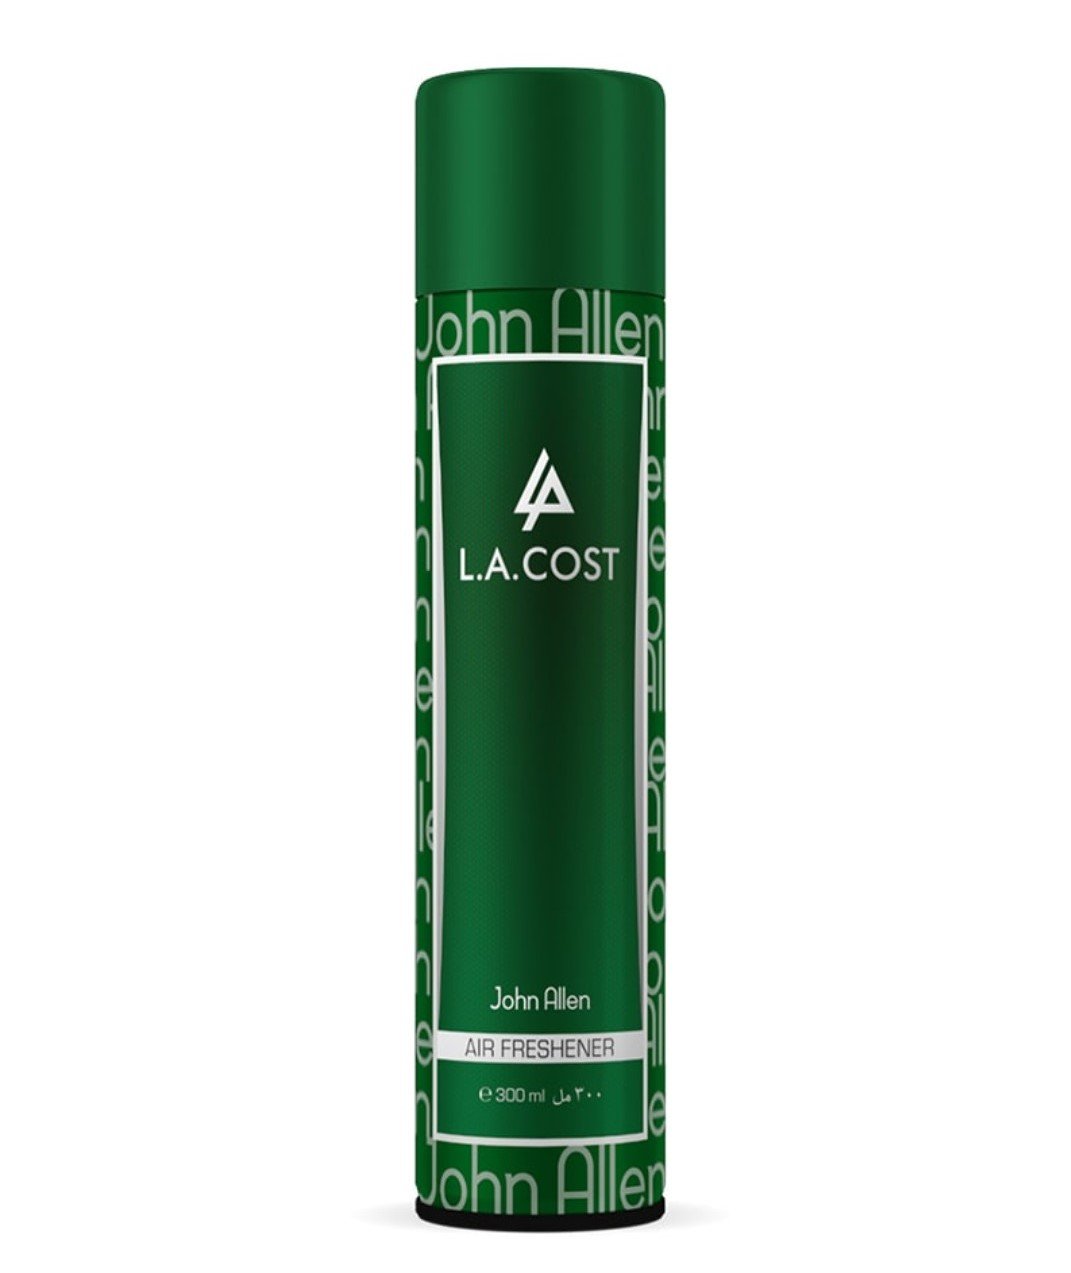 John Allen 2&2 Club Men Assorted Air freshner spray 300ml comes with an assorted smell which gives long lasting freshness suitable for bar, room, office, car and bathroom. This air freshner spray is value for money and worth the quality.